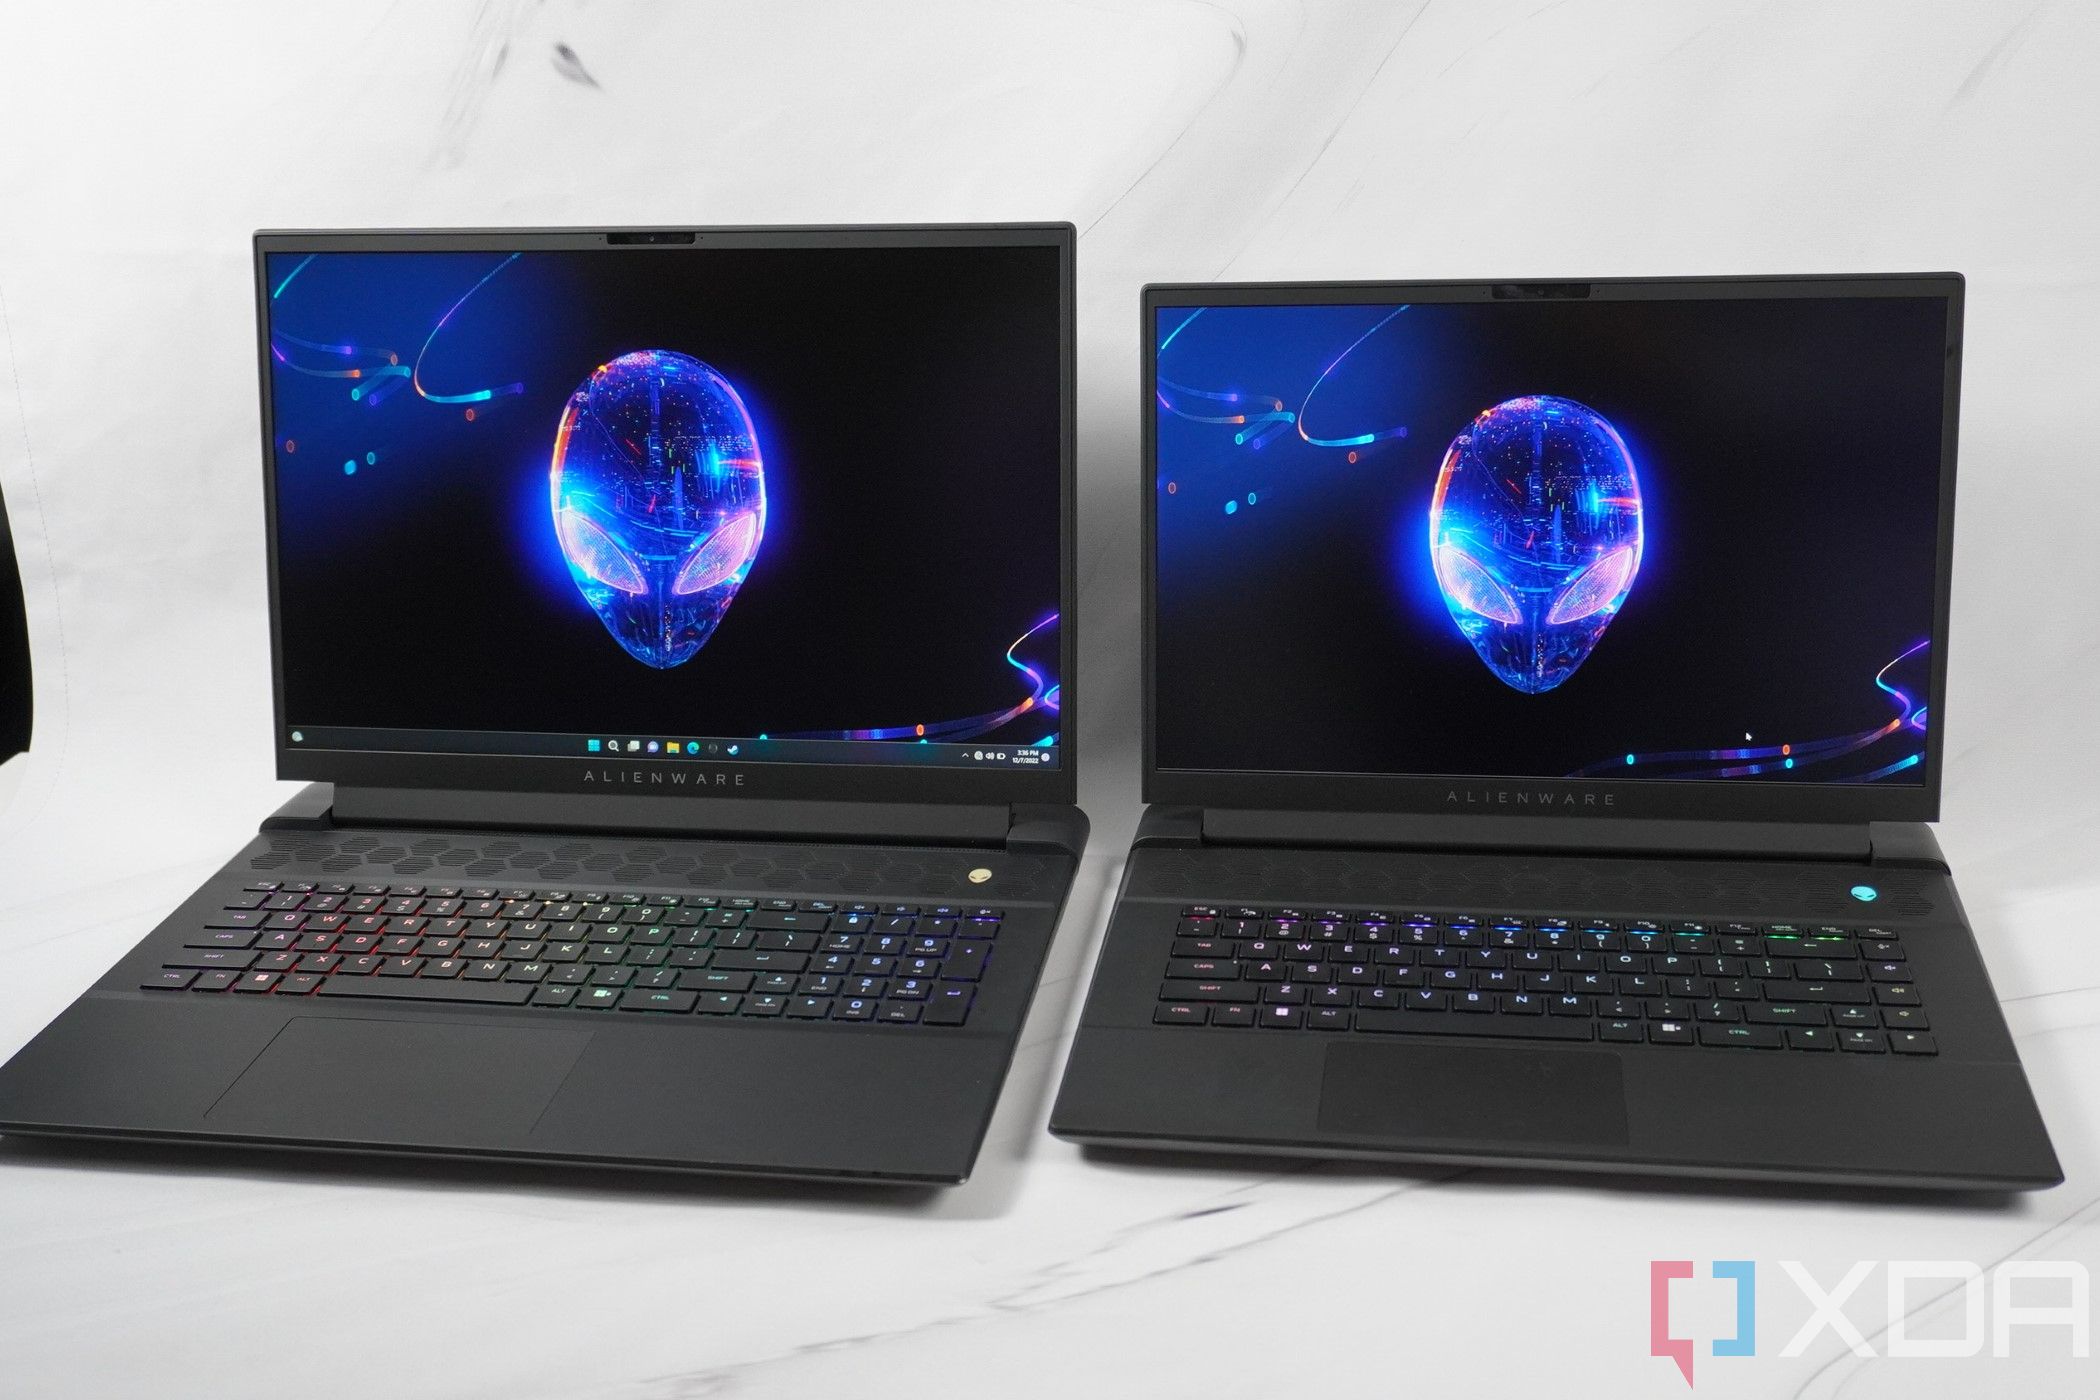 Alienware M16 and M18